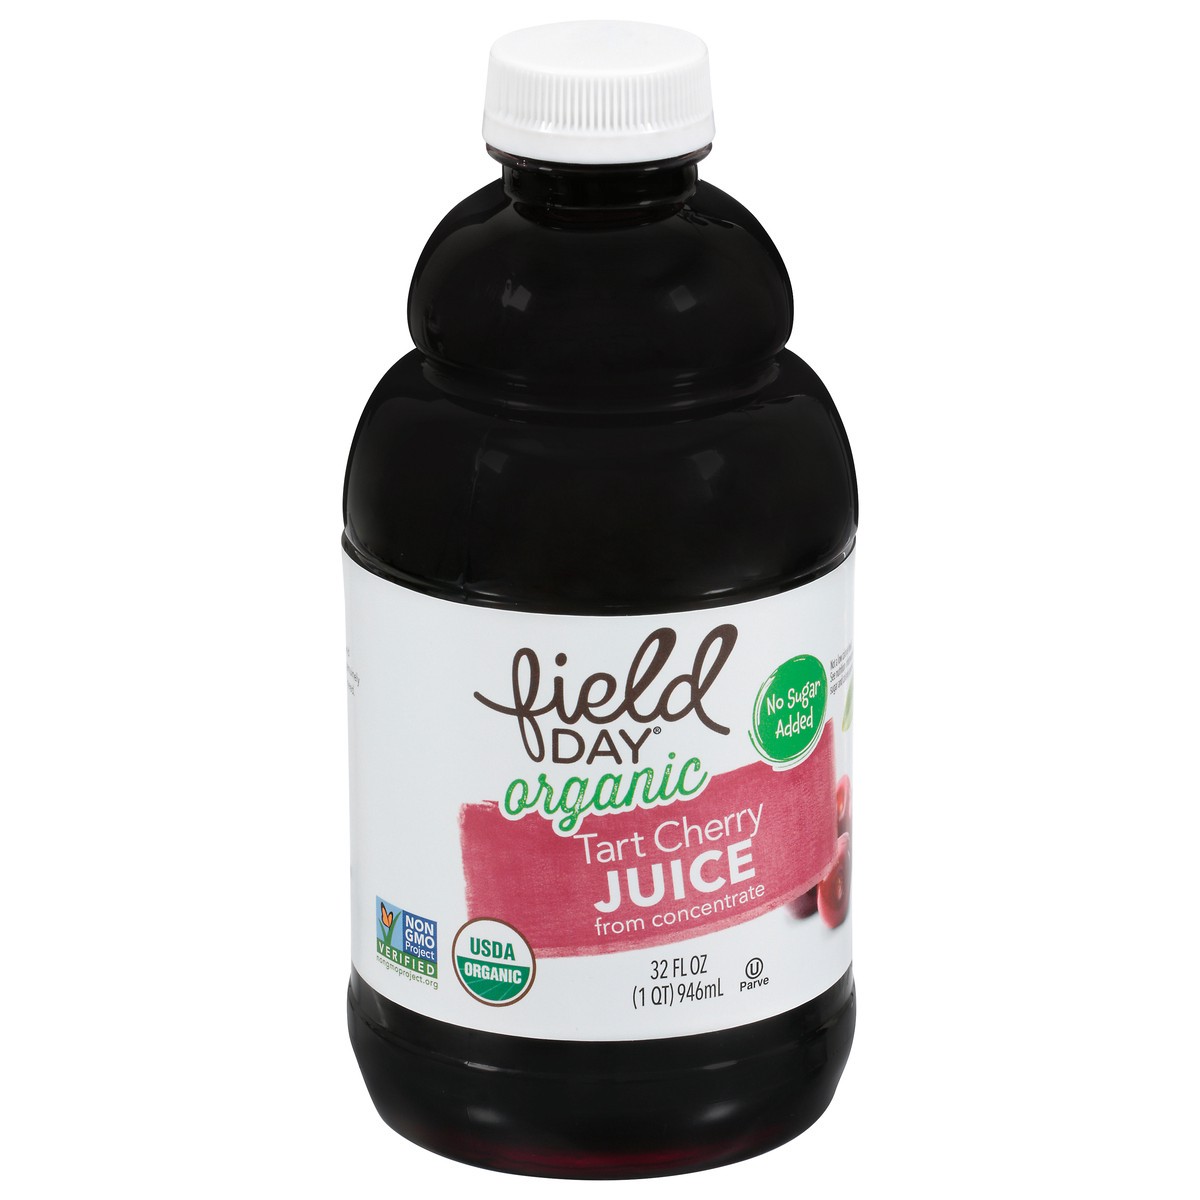 slide 12 of 13, Field Day Organic Tart Cherry Juice from Concentrate 32 fl oz, 32 oz